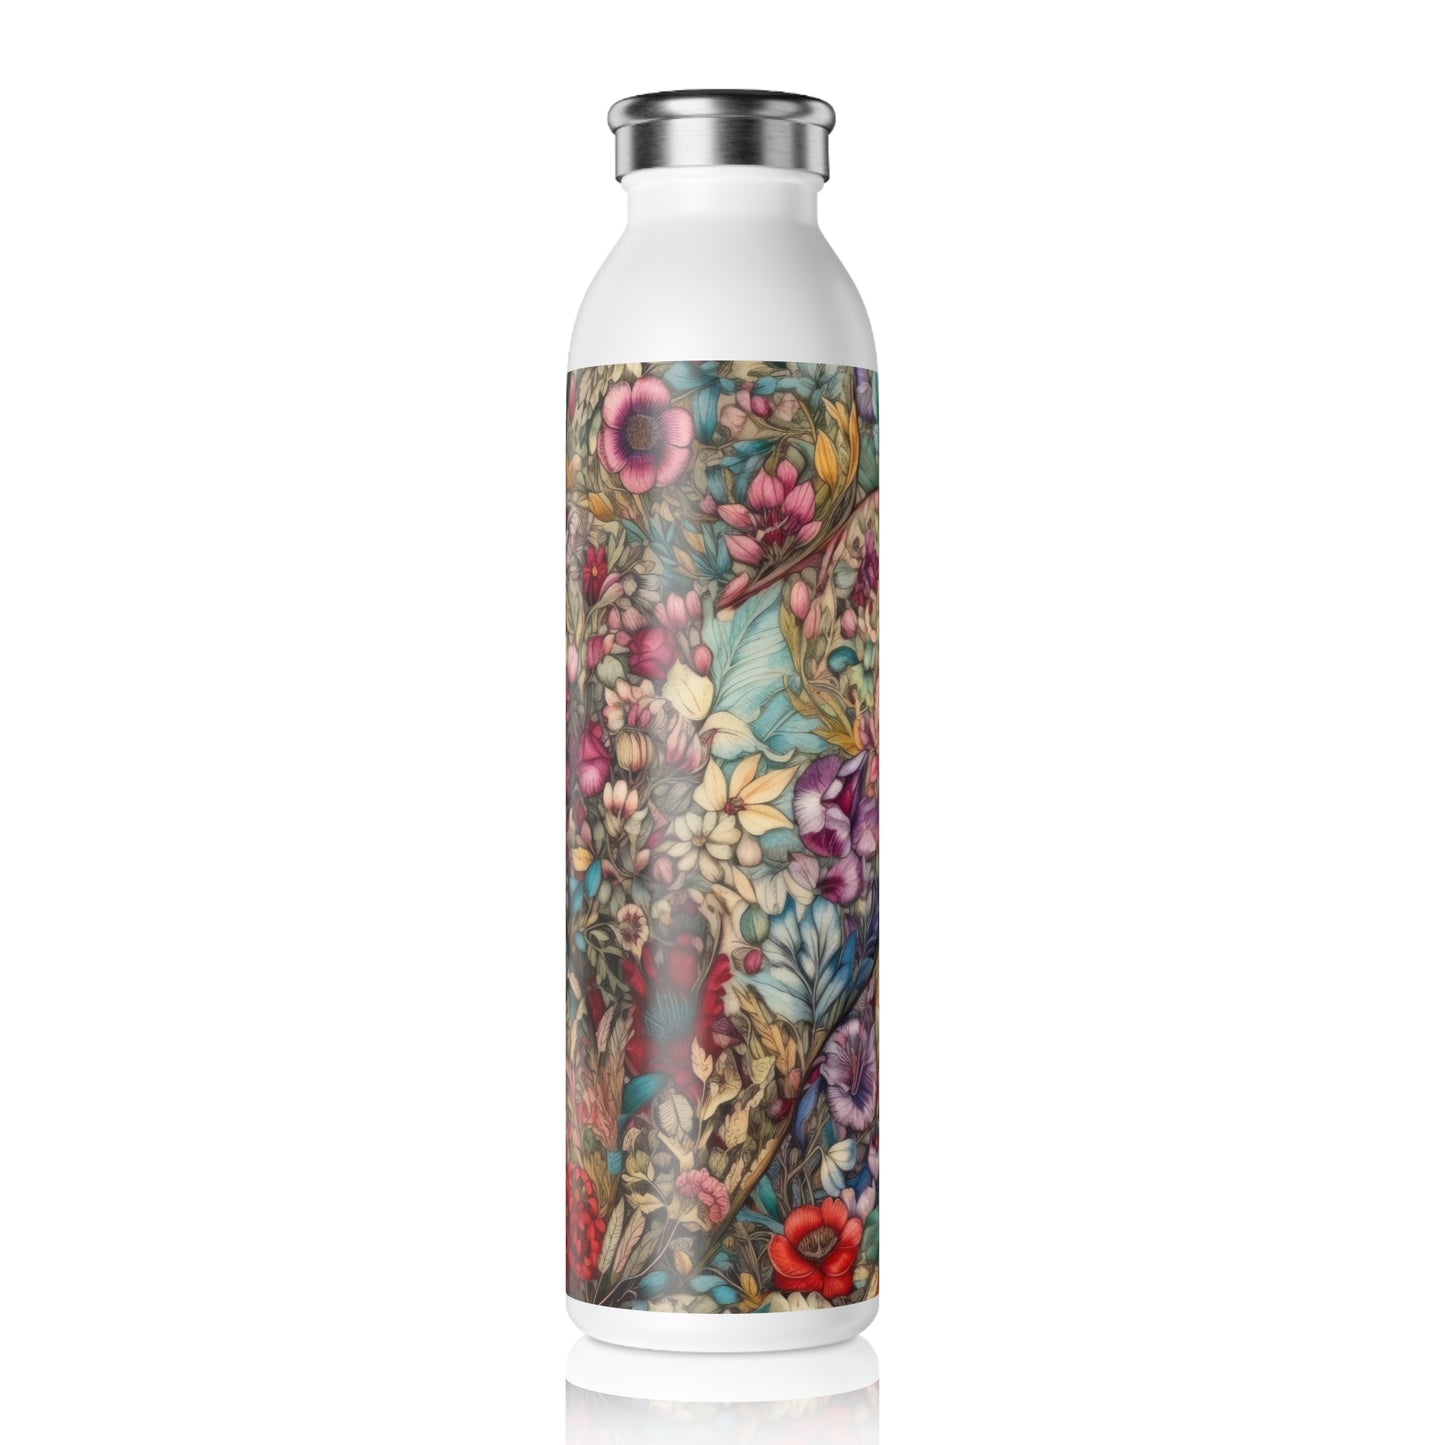 Fabric Hearts with Flowers 1.12 - Slim Water Bottle - Stainless Steel - 20oz